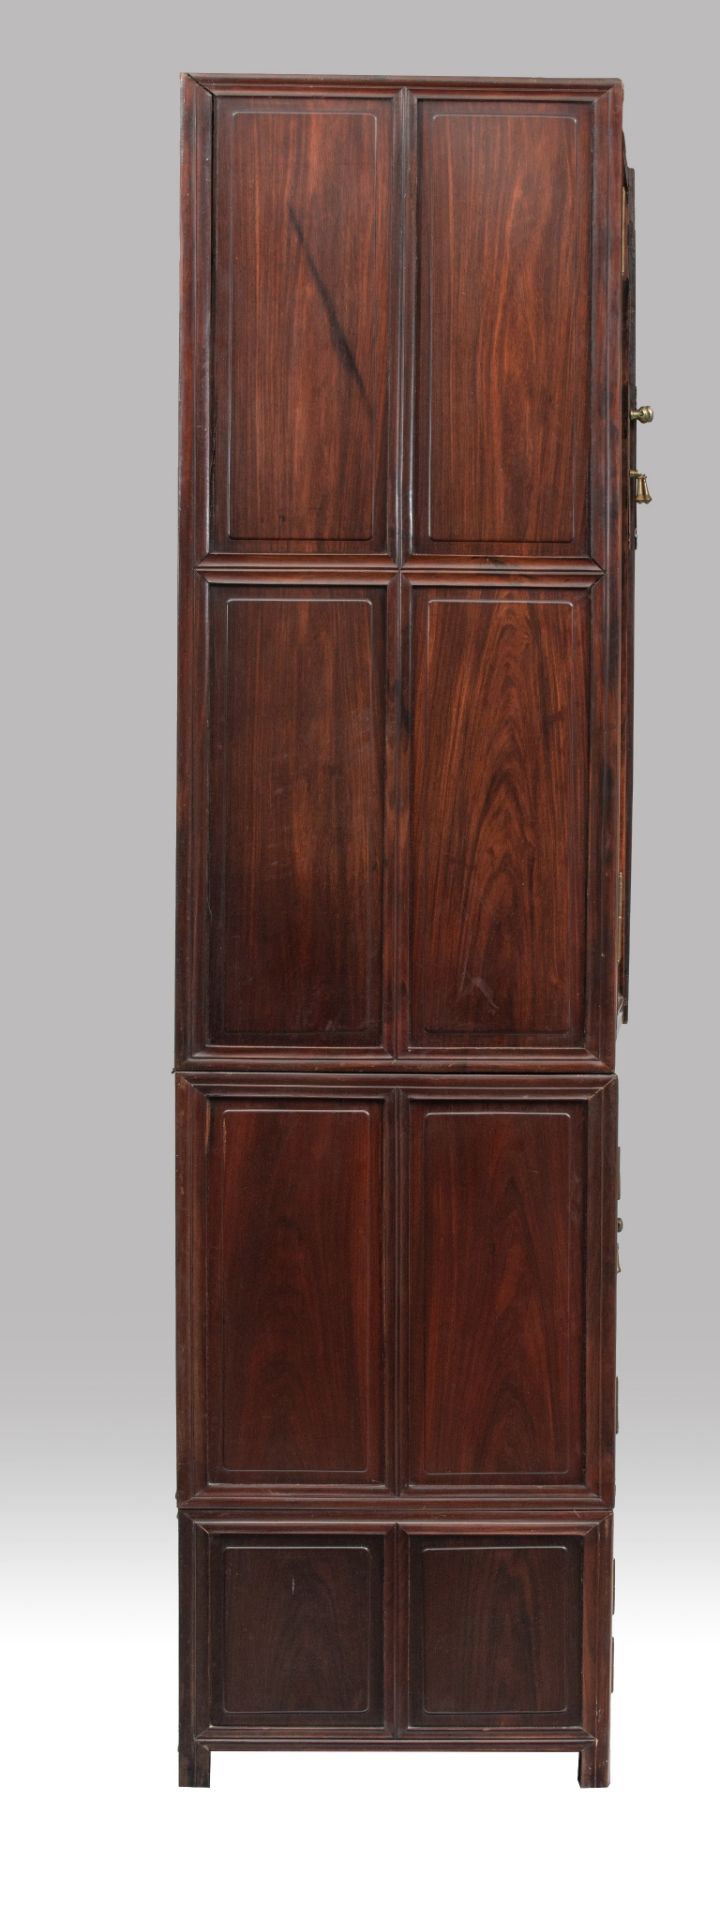 A Chinese hardwood compound cabinet, dingxianggui, Republic period, 118 x 60 cm - H 237 cm - Image 6 of 7